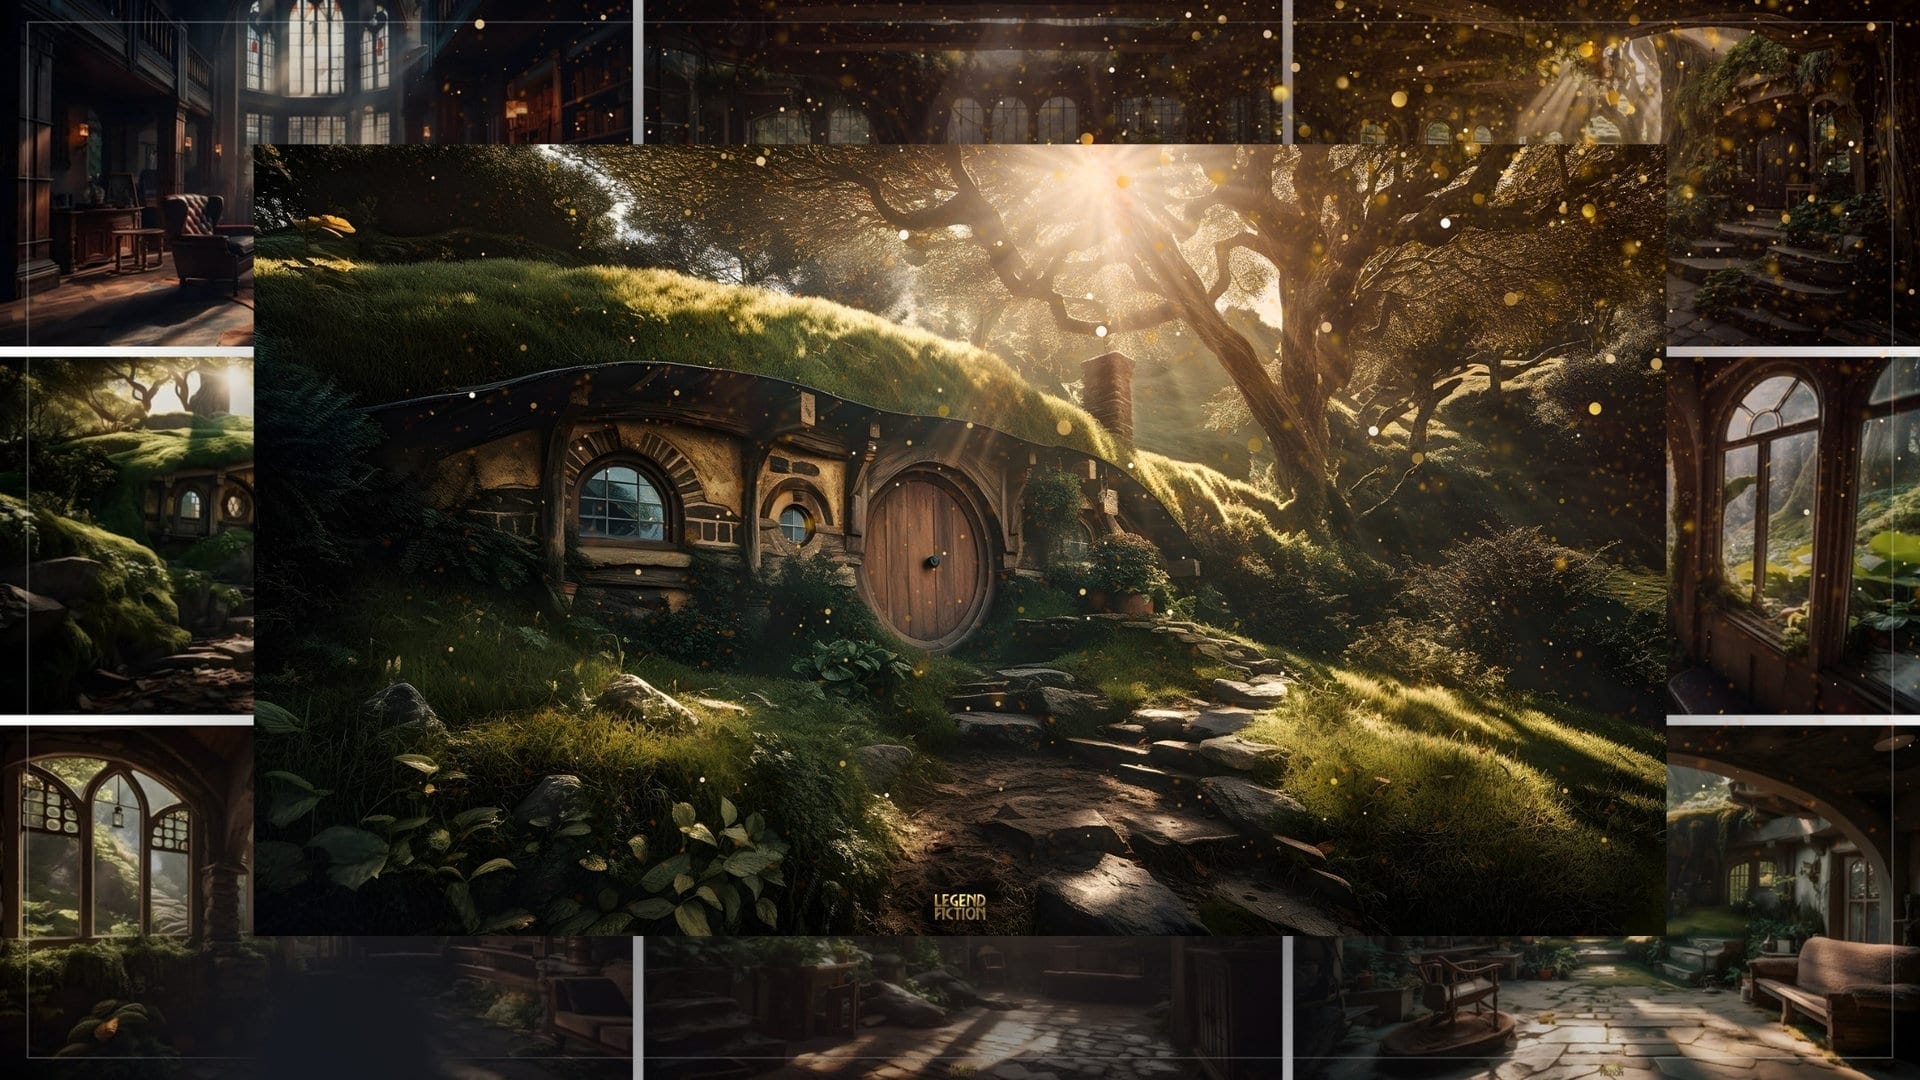 Fantasy Homes & Hobbit Libraries- Free wallpapers for your screens, stories, & inspiration!